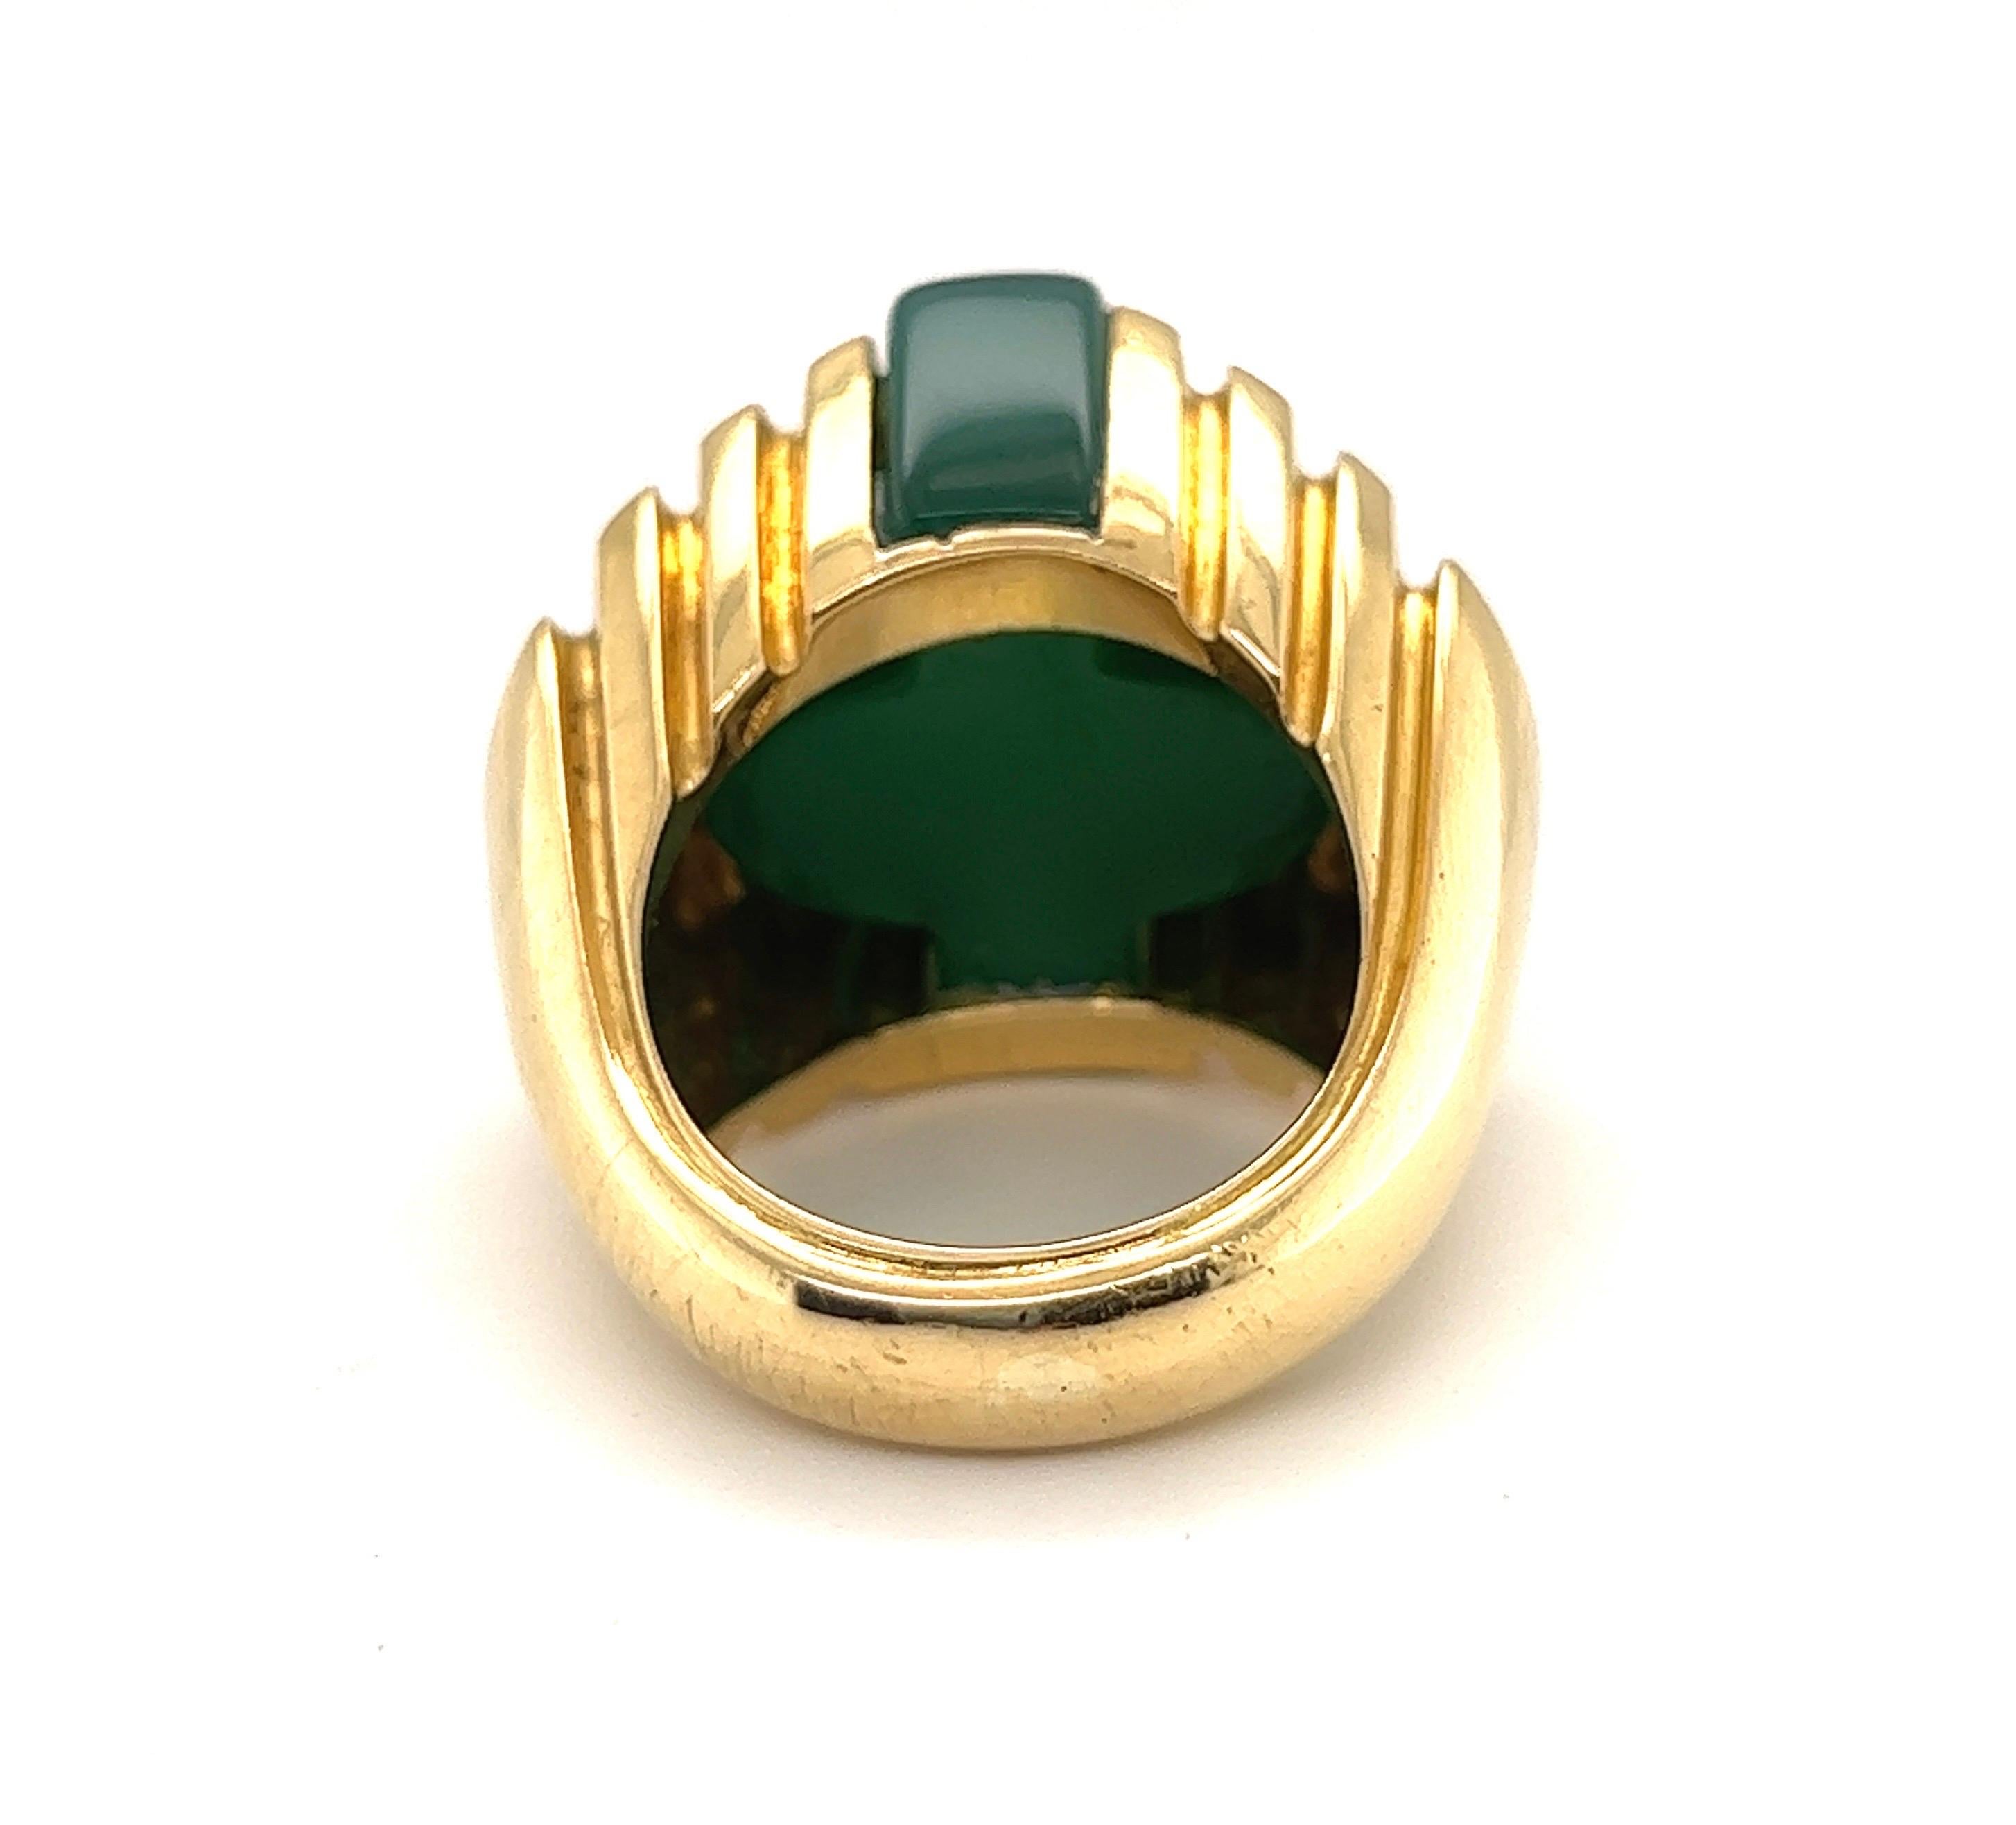 Women's or Men's Cartier Aldo Cipullo 18 Karat Yellow Gold and Green Agate Cocktail Ring, 1971